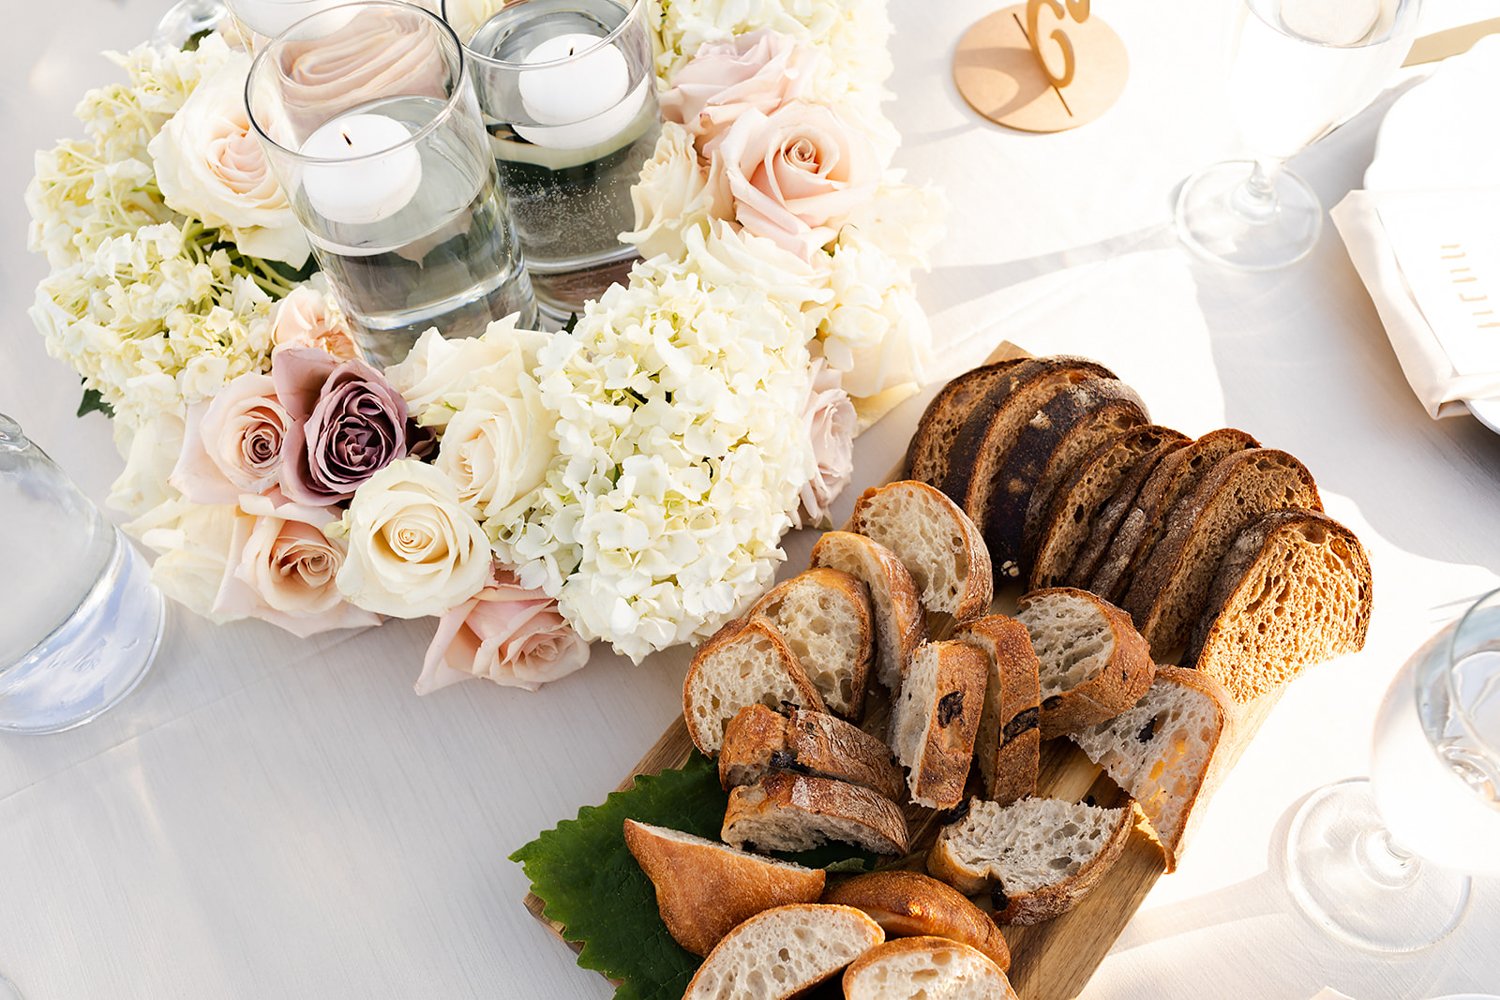 assortment of sliced artisan breads displayed on table at wedding